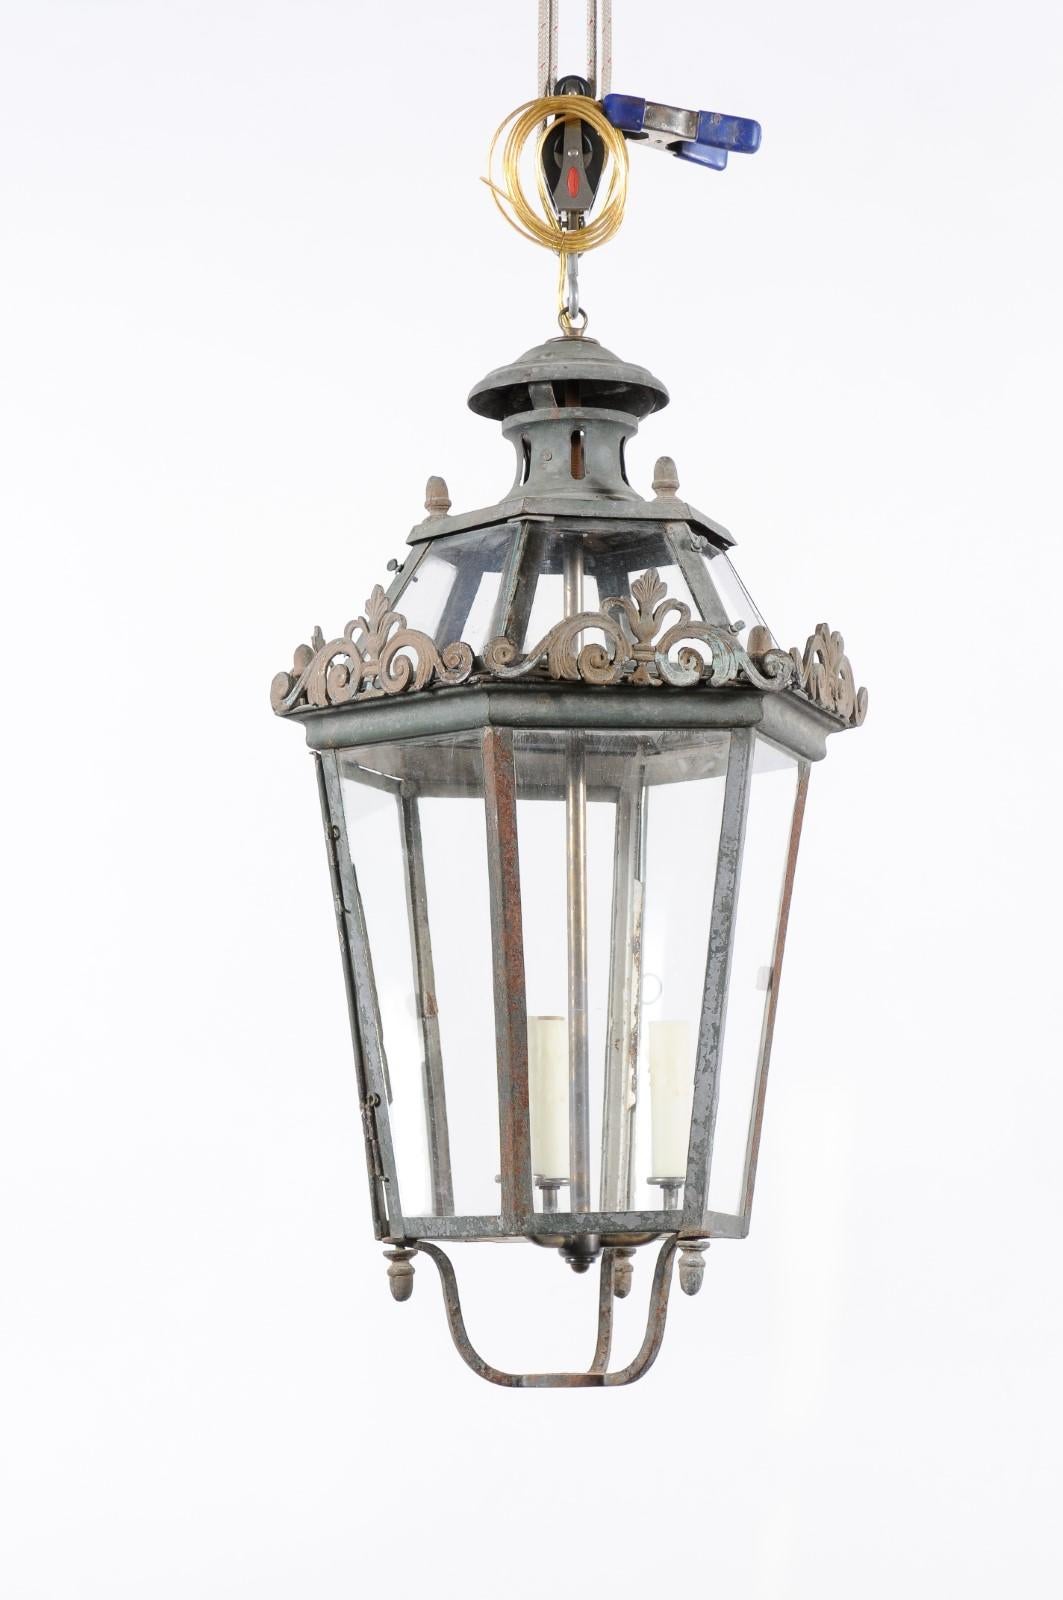  Venetian Painted Iron Street Lantern with 3 Lights, Late 19th Century In Good Condition For Sale In Atlanta, GA